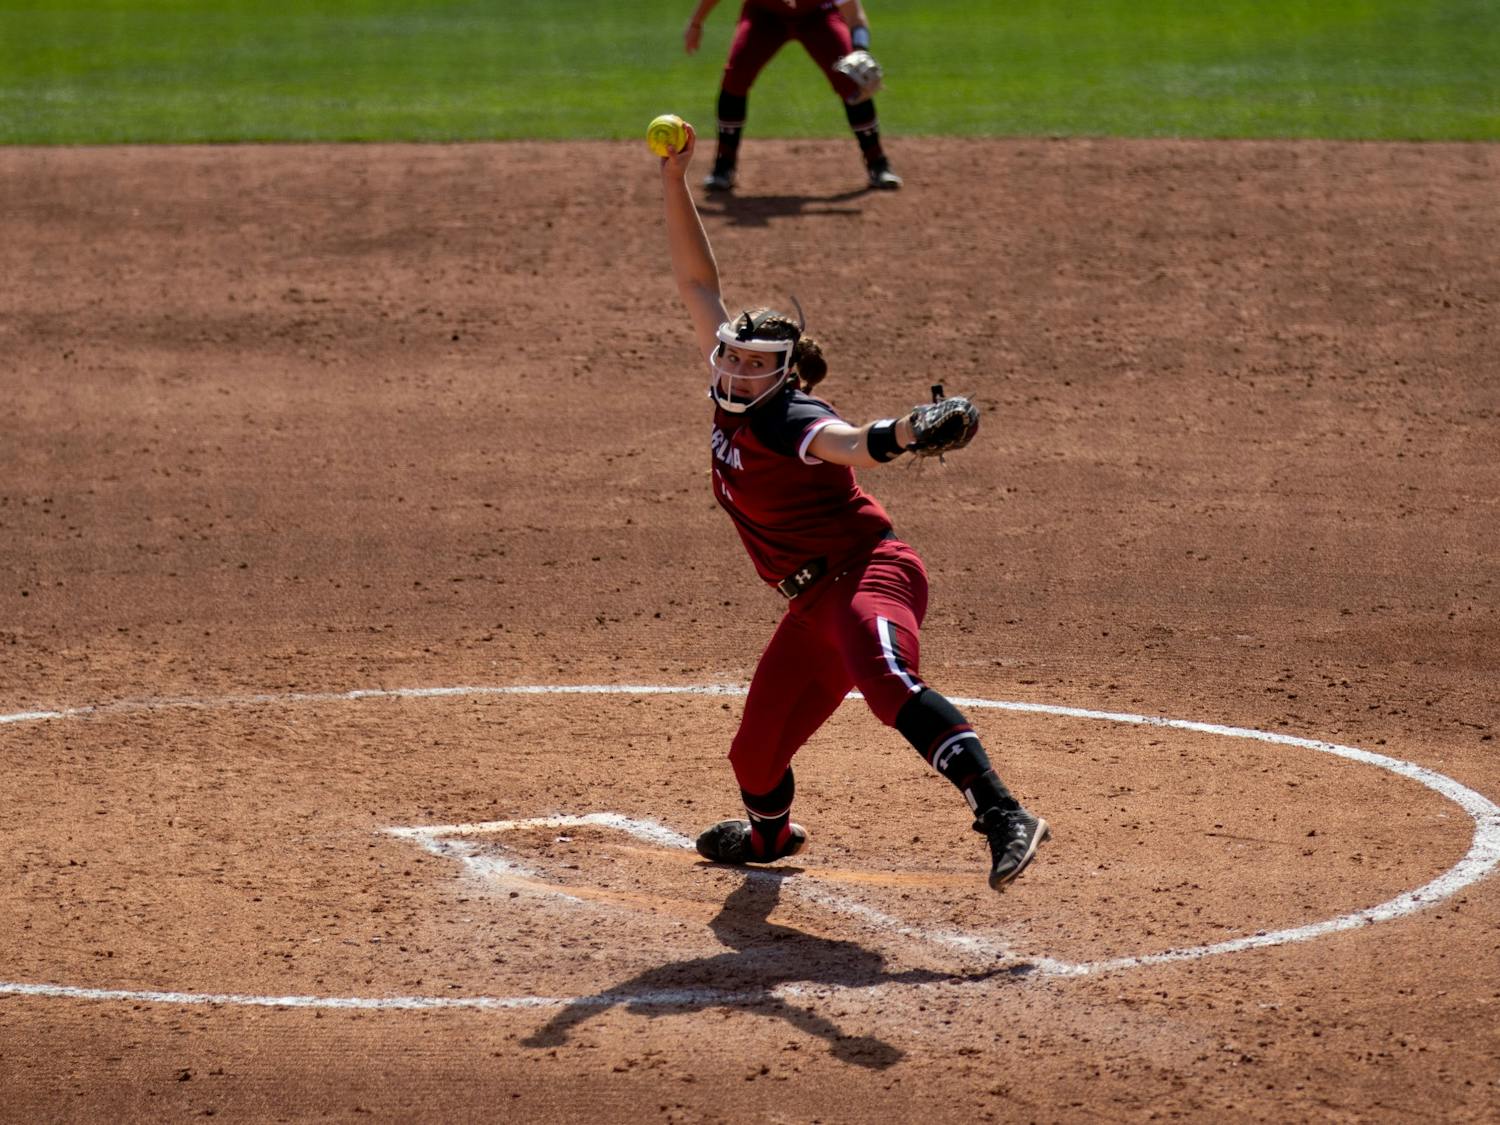 Junior pitcher Bailey Betenbaugh throws a pitch at Beckham Field on Saturday Feb. 26, 2022. South Carolina lost to Virginia Tech 5-3.